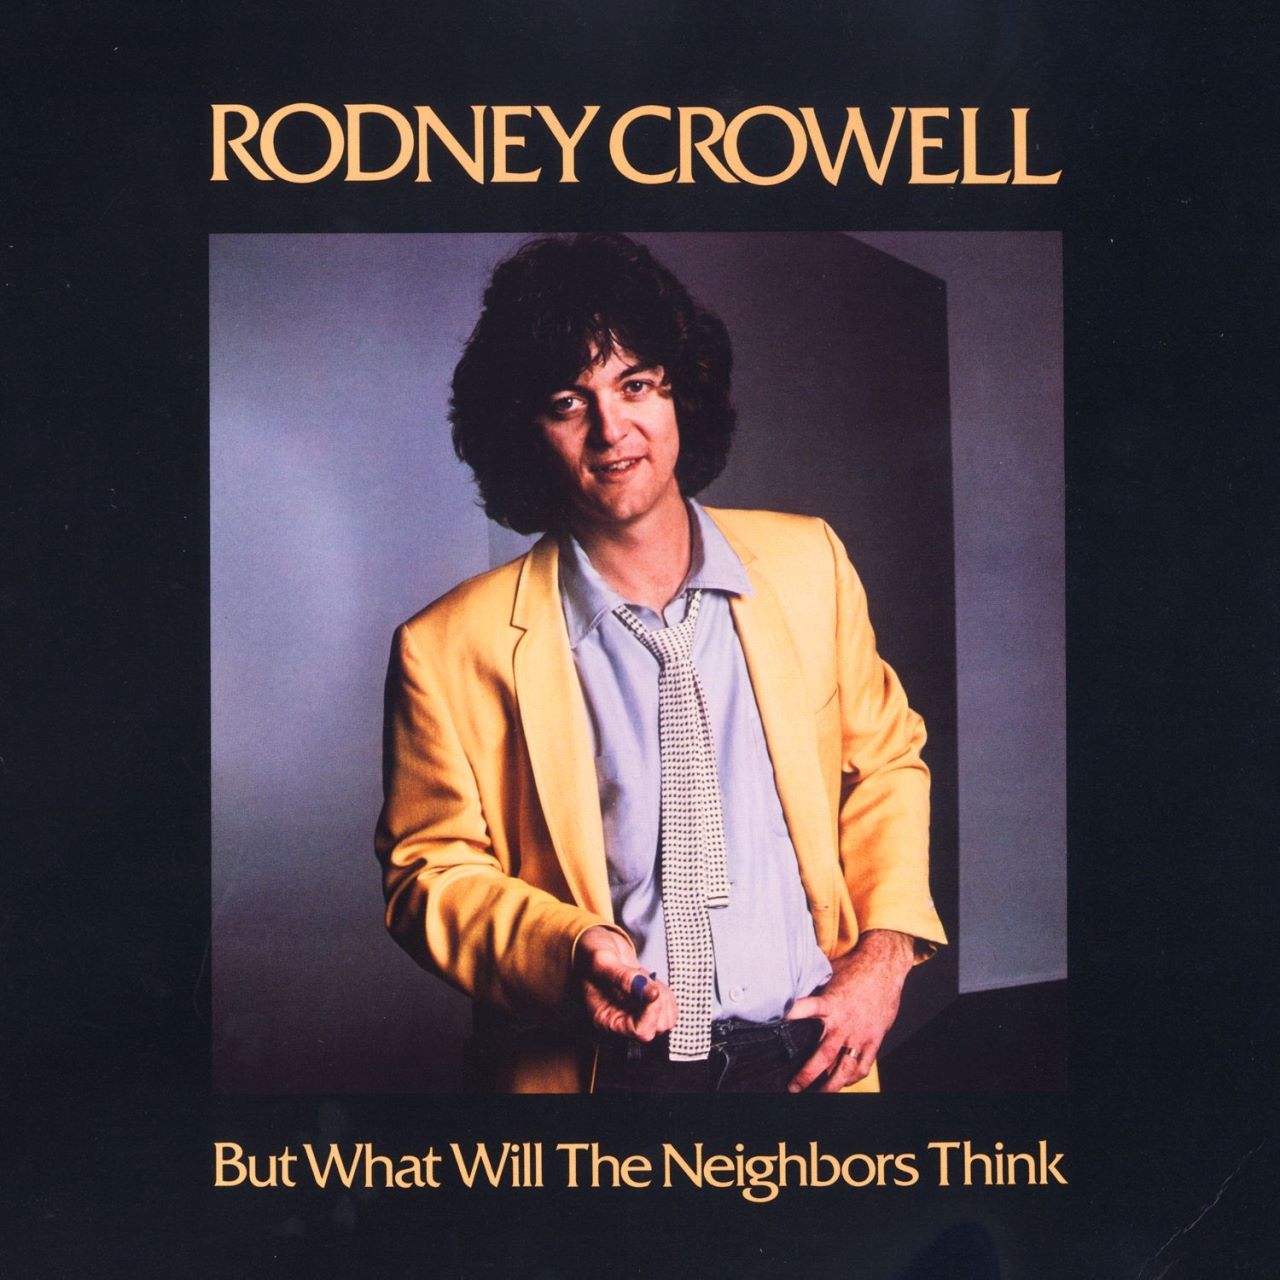 Rodney Crowell - But What Will The Neighbors Think cover album